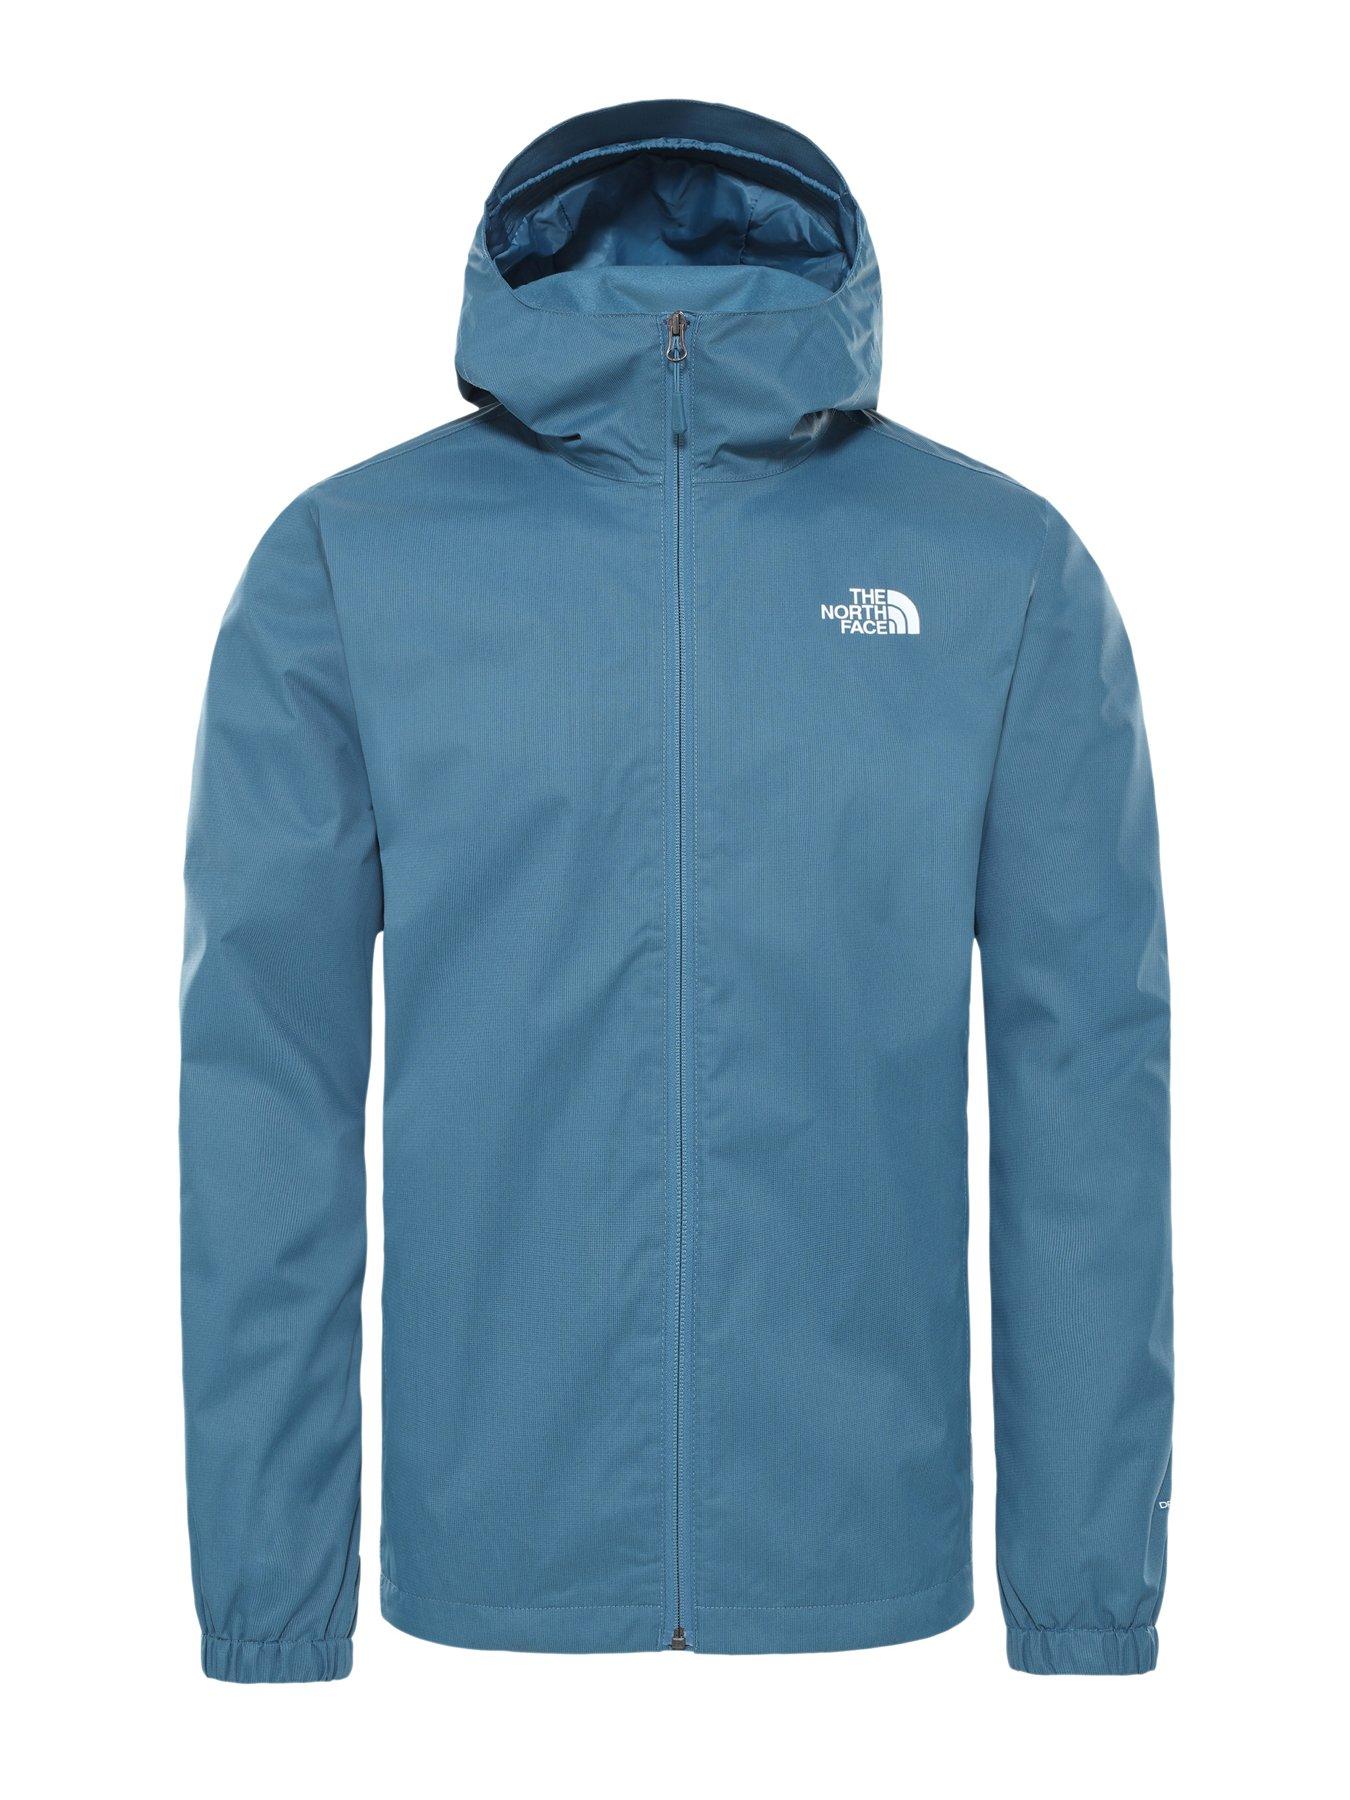 THE NORTH FACE Quest Jacket - Blue 